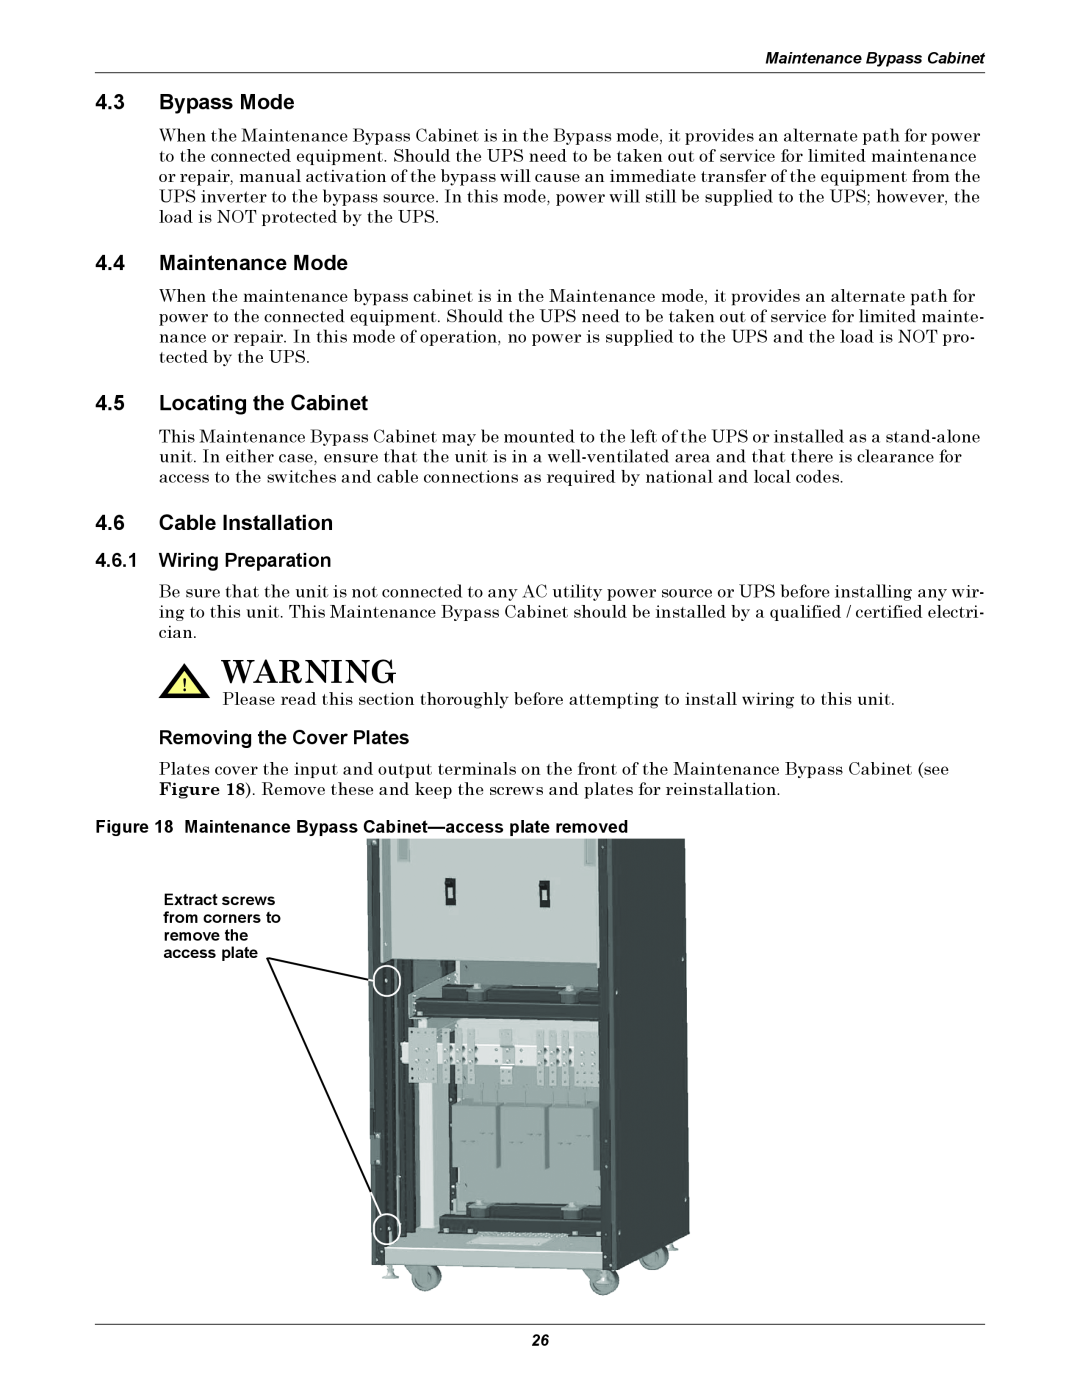 Emerson 10-30kVA, 208V 4.3Bypass Mode, 4.4Maintenance Mode, 4.5Locating the Cabinet, 4.6Cable Installation 